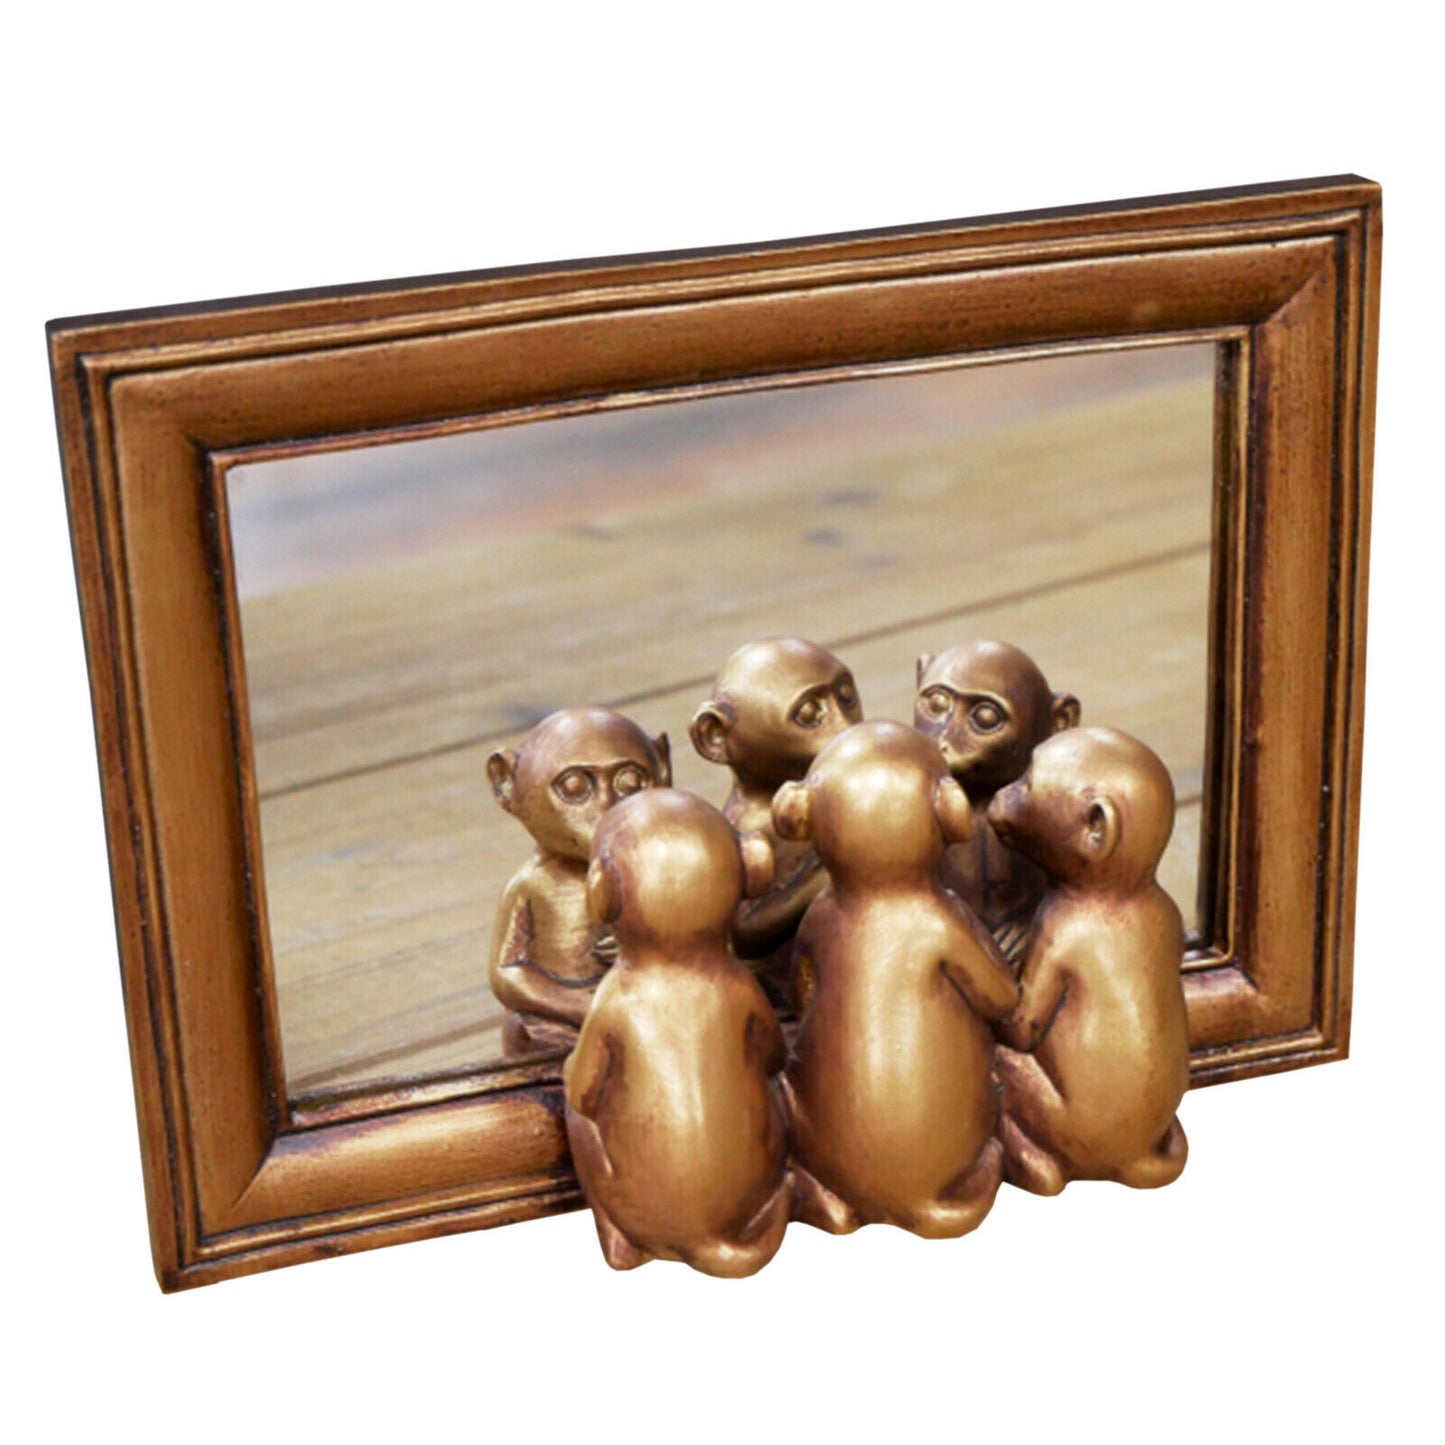 Distressed Copper Effect 3 Monkeys Small Rectangle Mirror Novelty Vanity